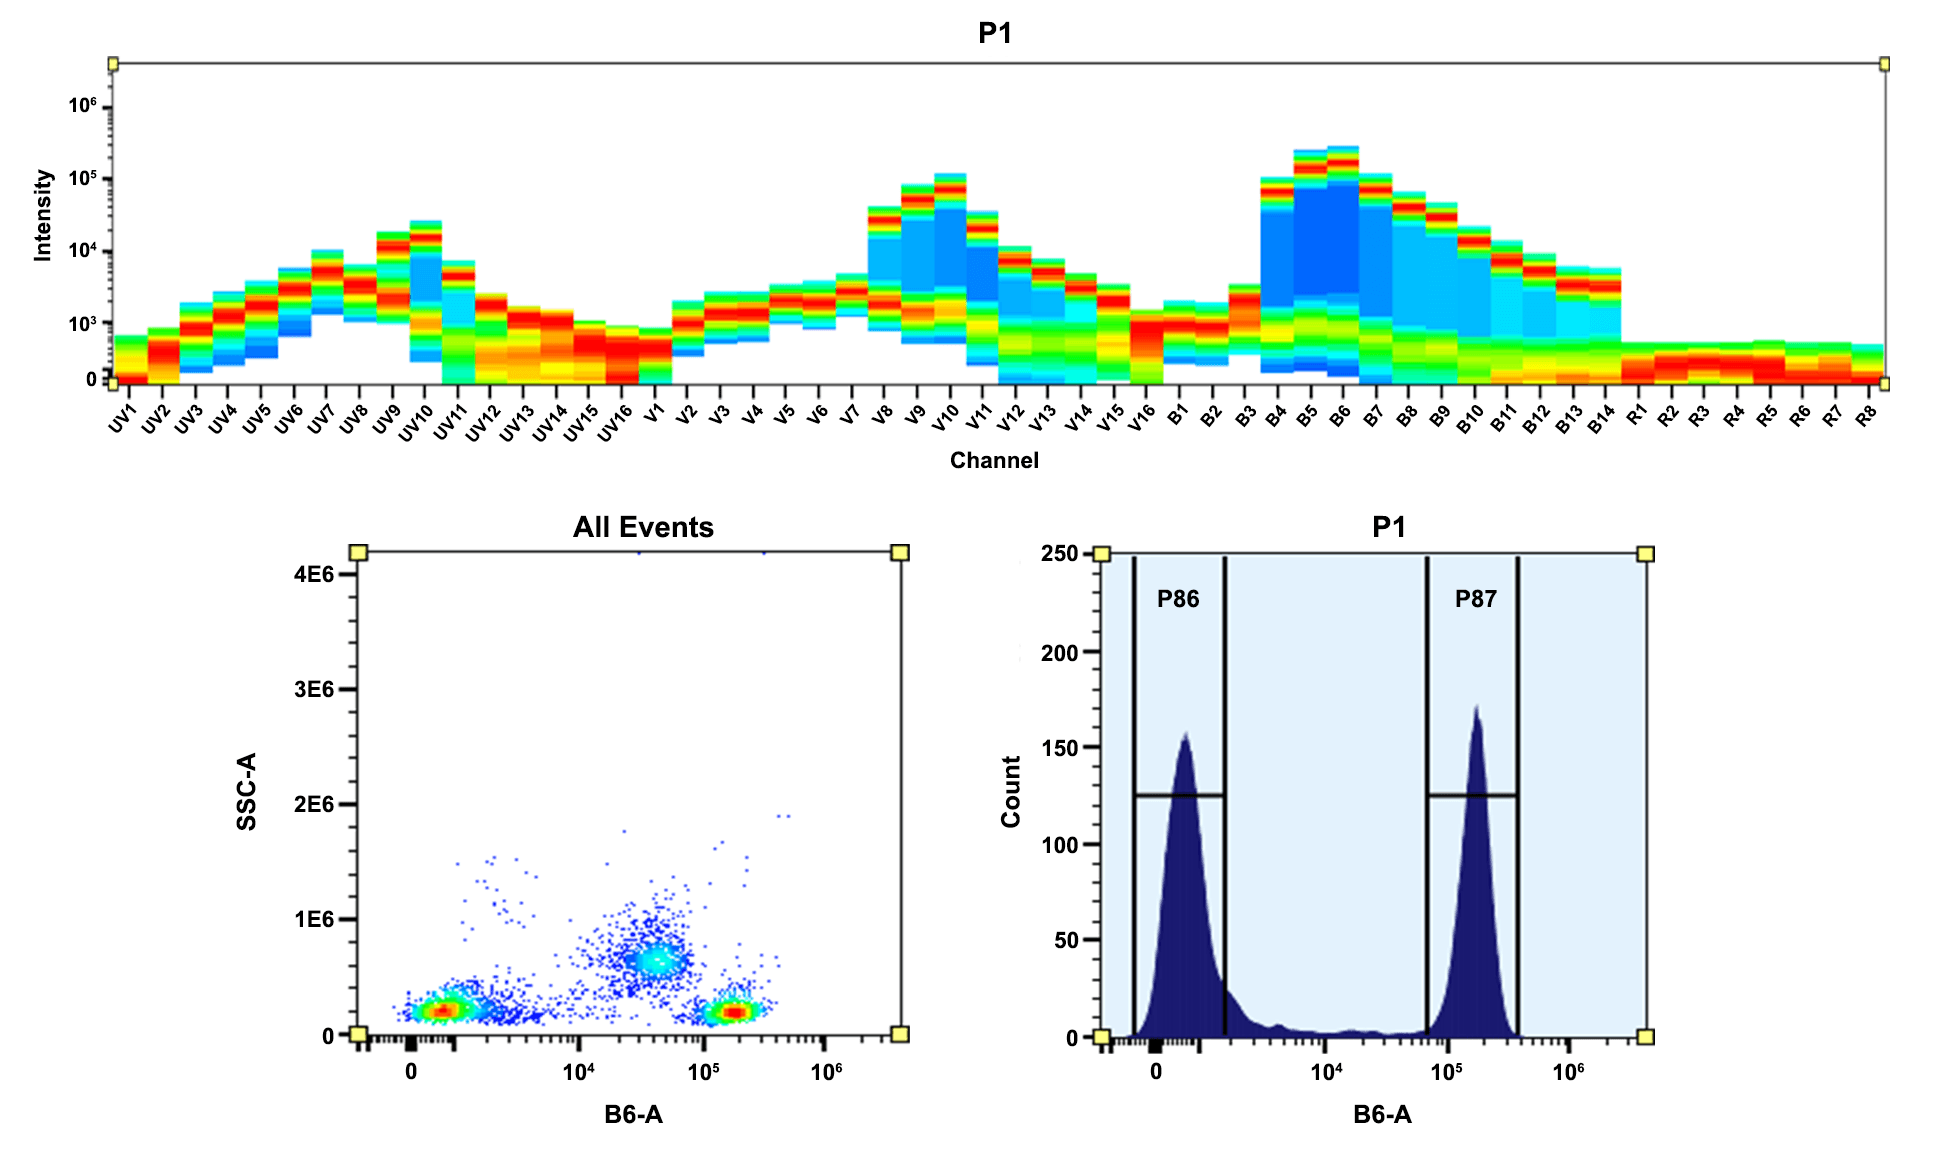 Top) Spectral pattern was generated using a 4-laser spectral cytometer. Spatially offset lasers (355 nm, 405 nm, 488 nm, and 640 nm) were used to create four distinct emission profiles, then, when combined, yielded the overall spectral signature. Bottom) Flow cytometry analysis of PBMC stained with PE/iFlour® 597 anti-human CD4 *SK3* conjugate. The fluorescence signal was monitored using an Aurora spectral flow cytometer in the PE/iFluor® 597 specific B6-A channel.